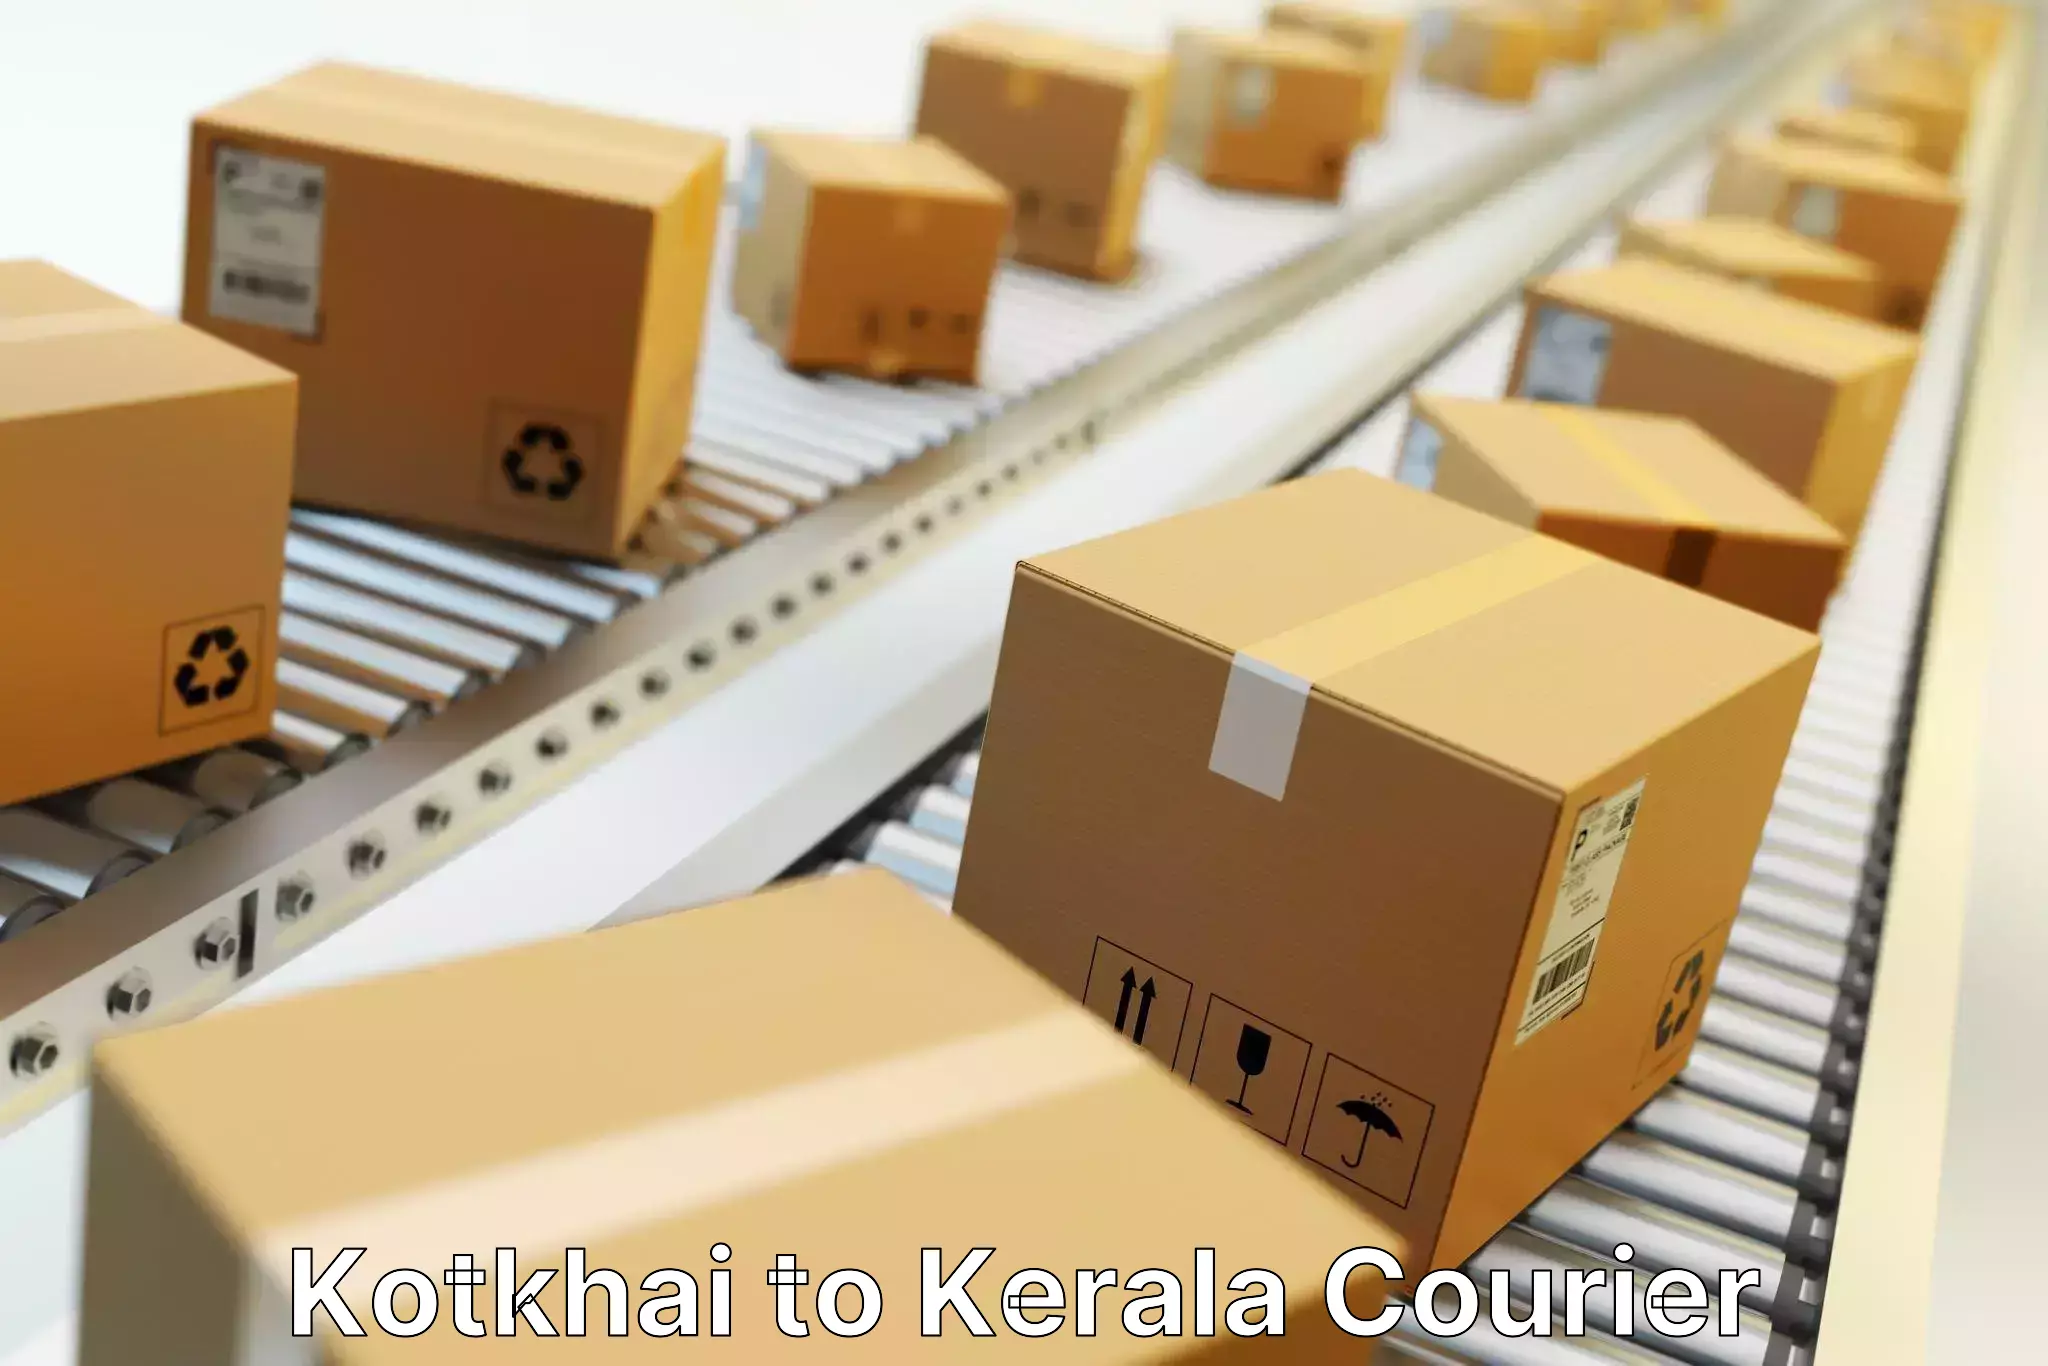 24/7 courier service Kotkhai to Ramankary